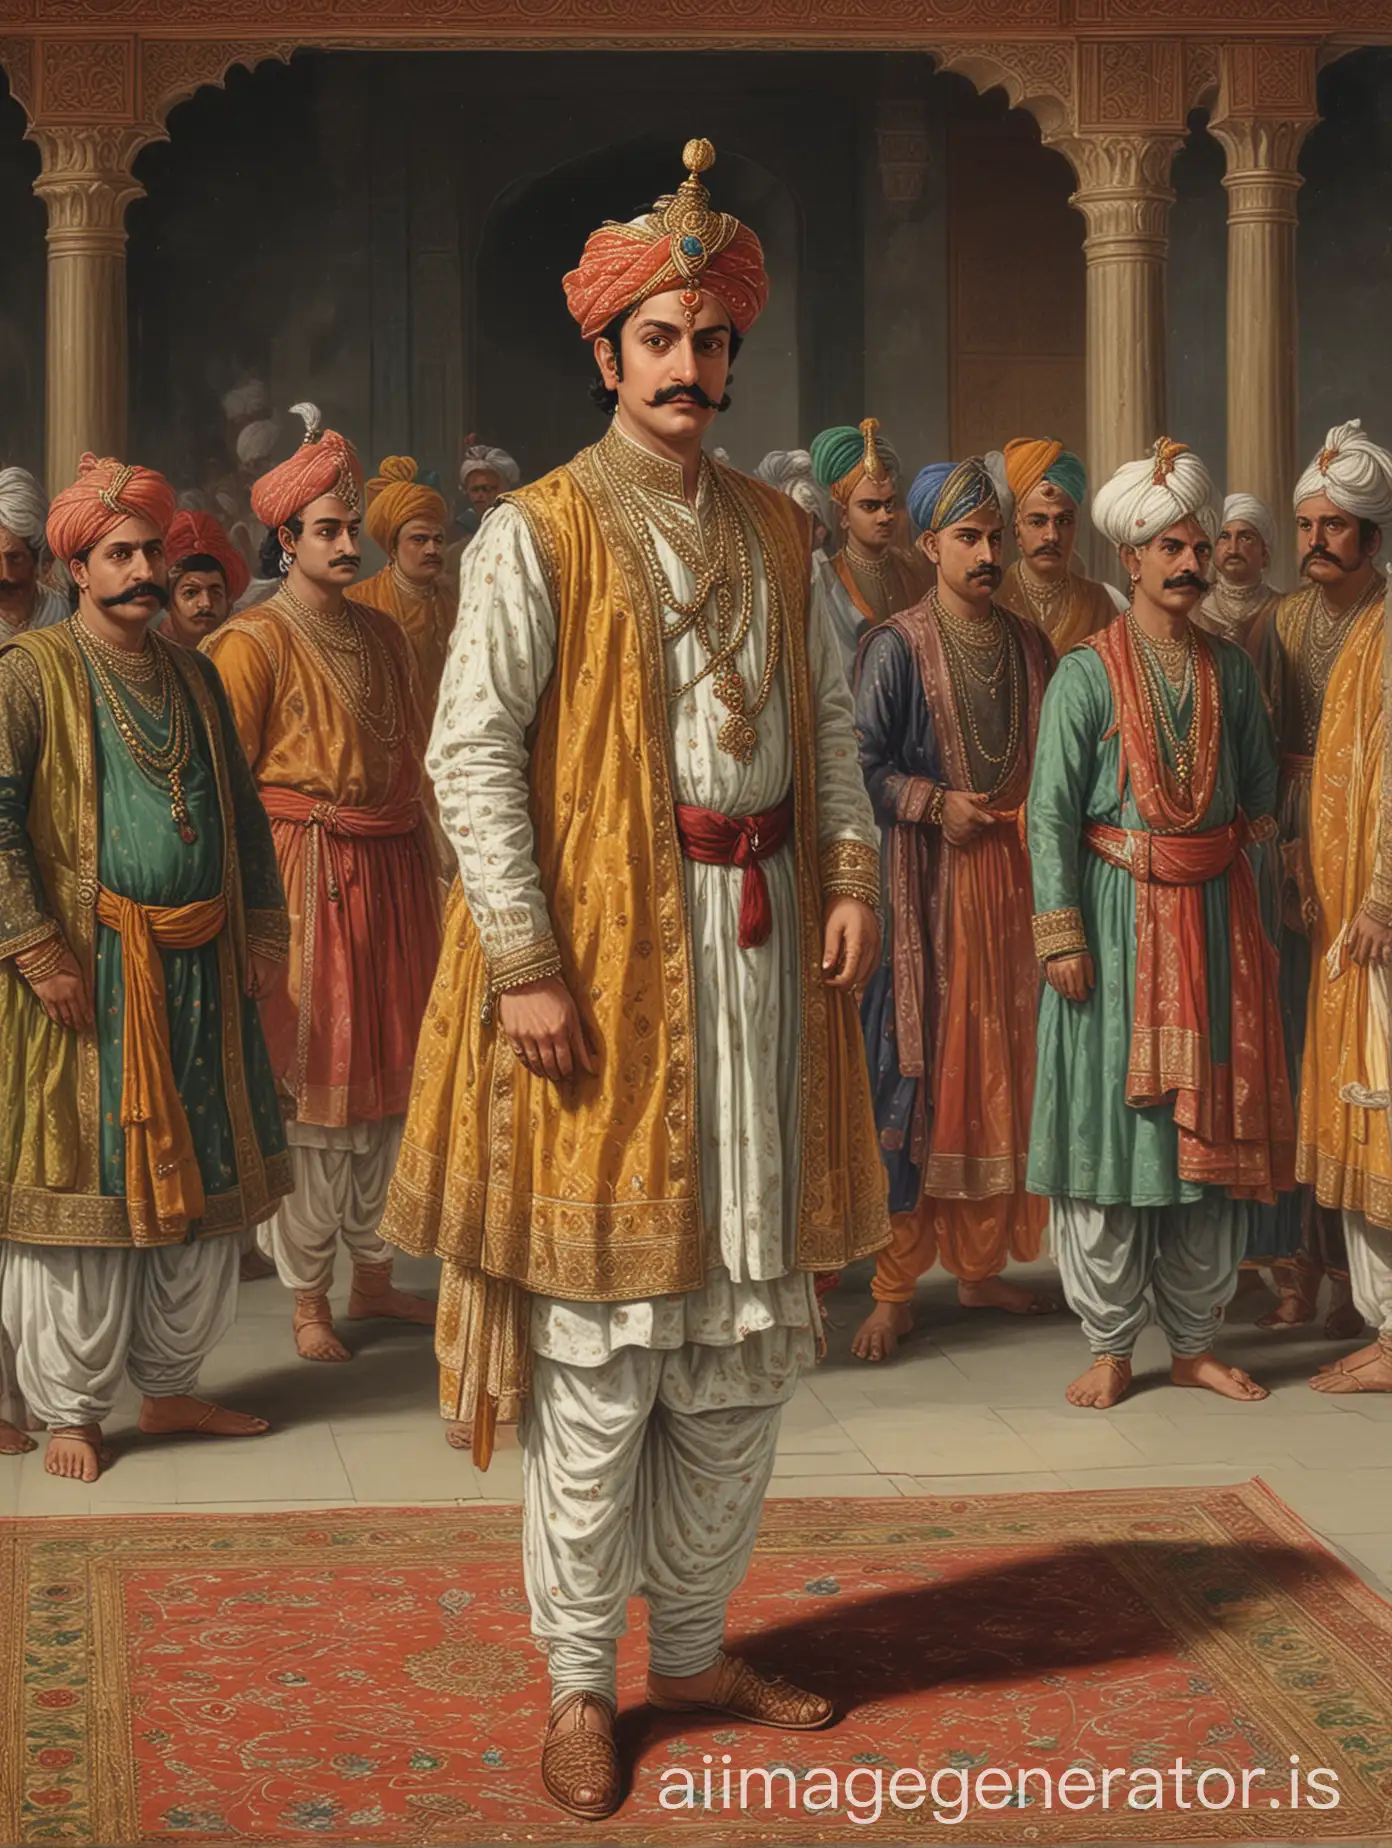 Birbal standing confidently before Emperor Akbar in the court. He is dressed in traditional Mughal attire with a calm, confident expression. The angle is slightly lower, looking up at Birbal to emphasize his confidence, with Akbar and the courtiers visible in the background, watching him."